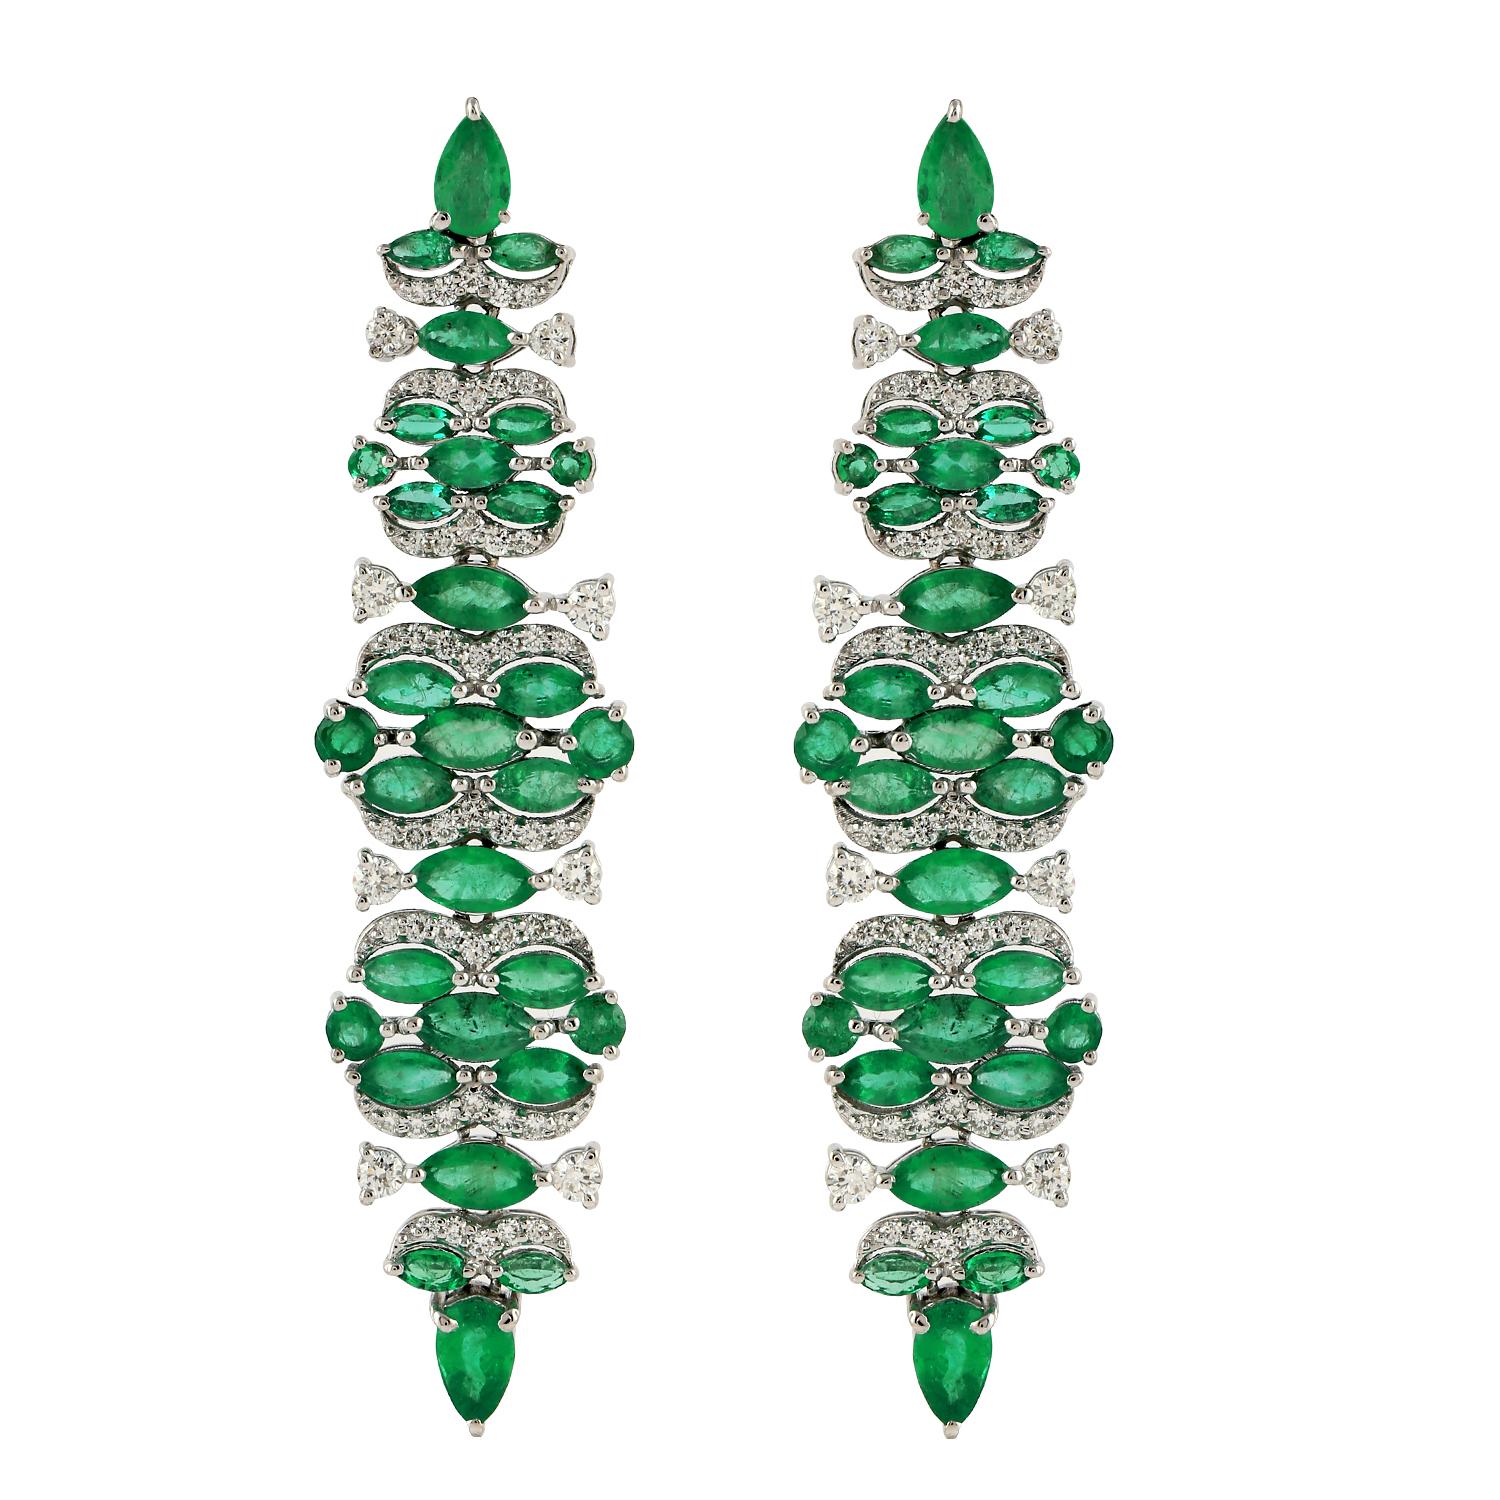 Mixed Cut Emerald Long Dangle Earrings With Diamonds Made In 14k White Gold For Sale